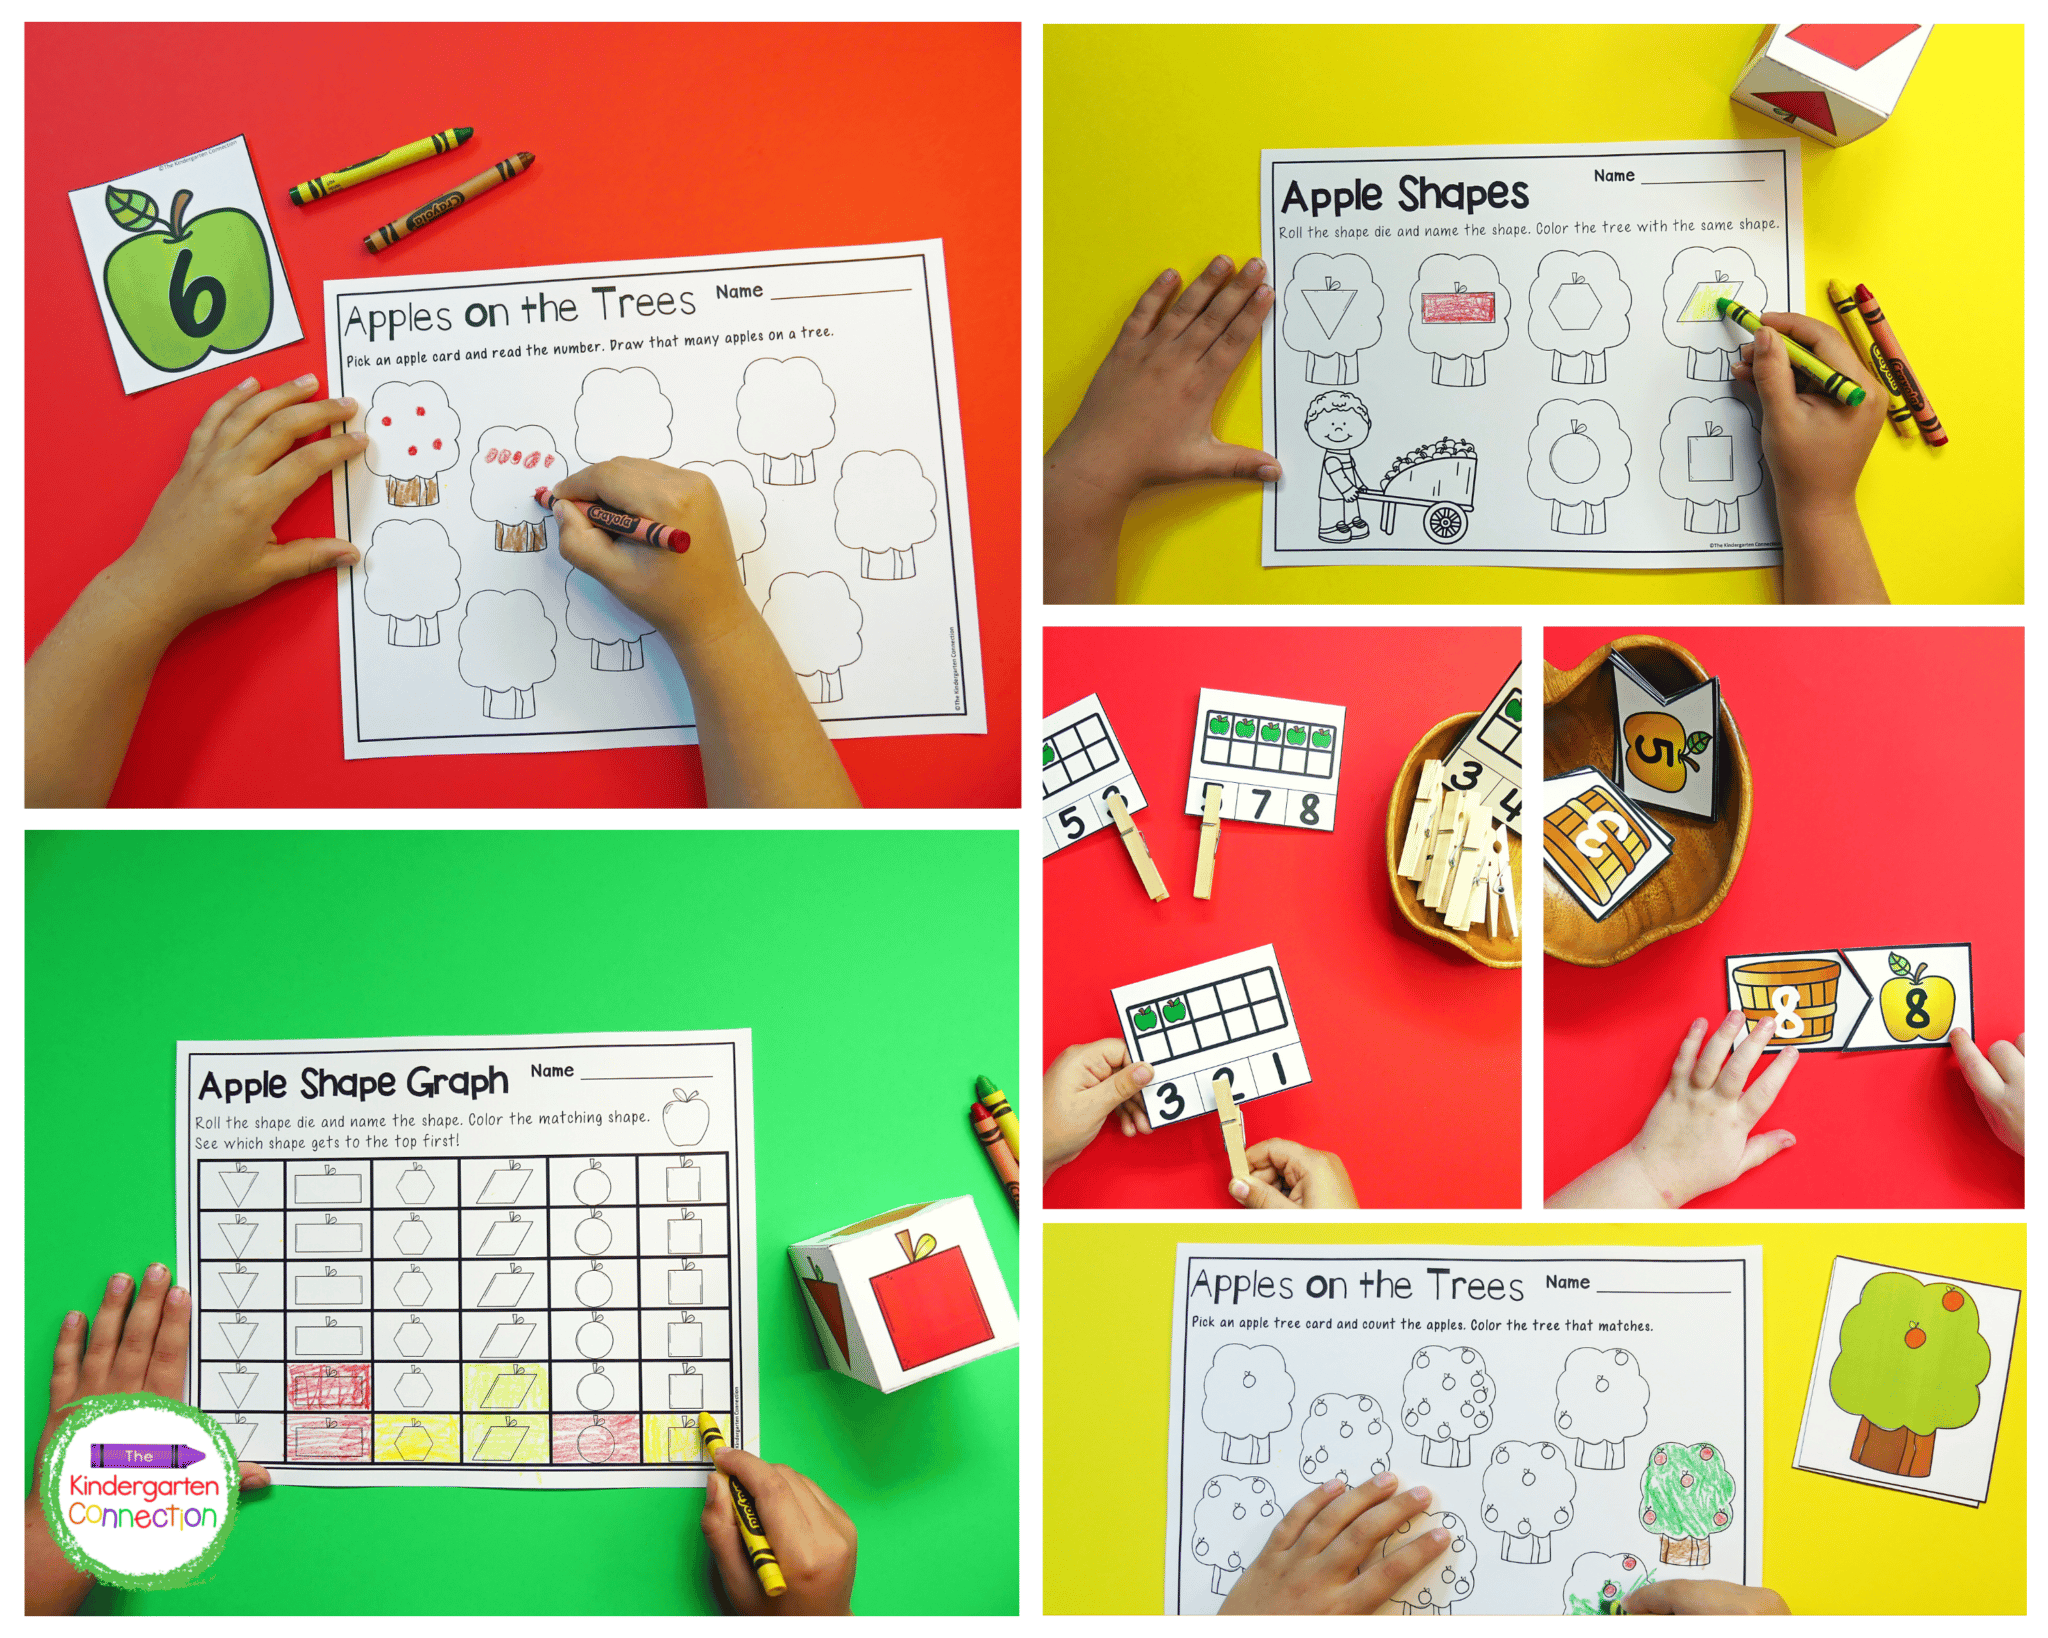 Your students will love the fun and interactive math activities!